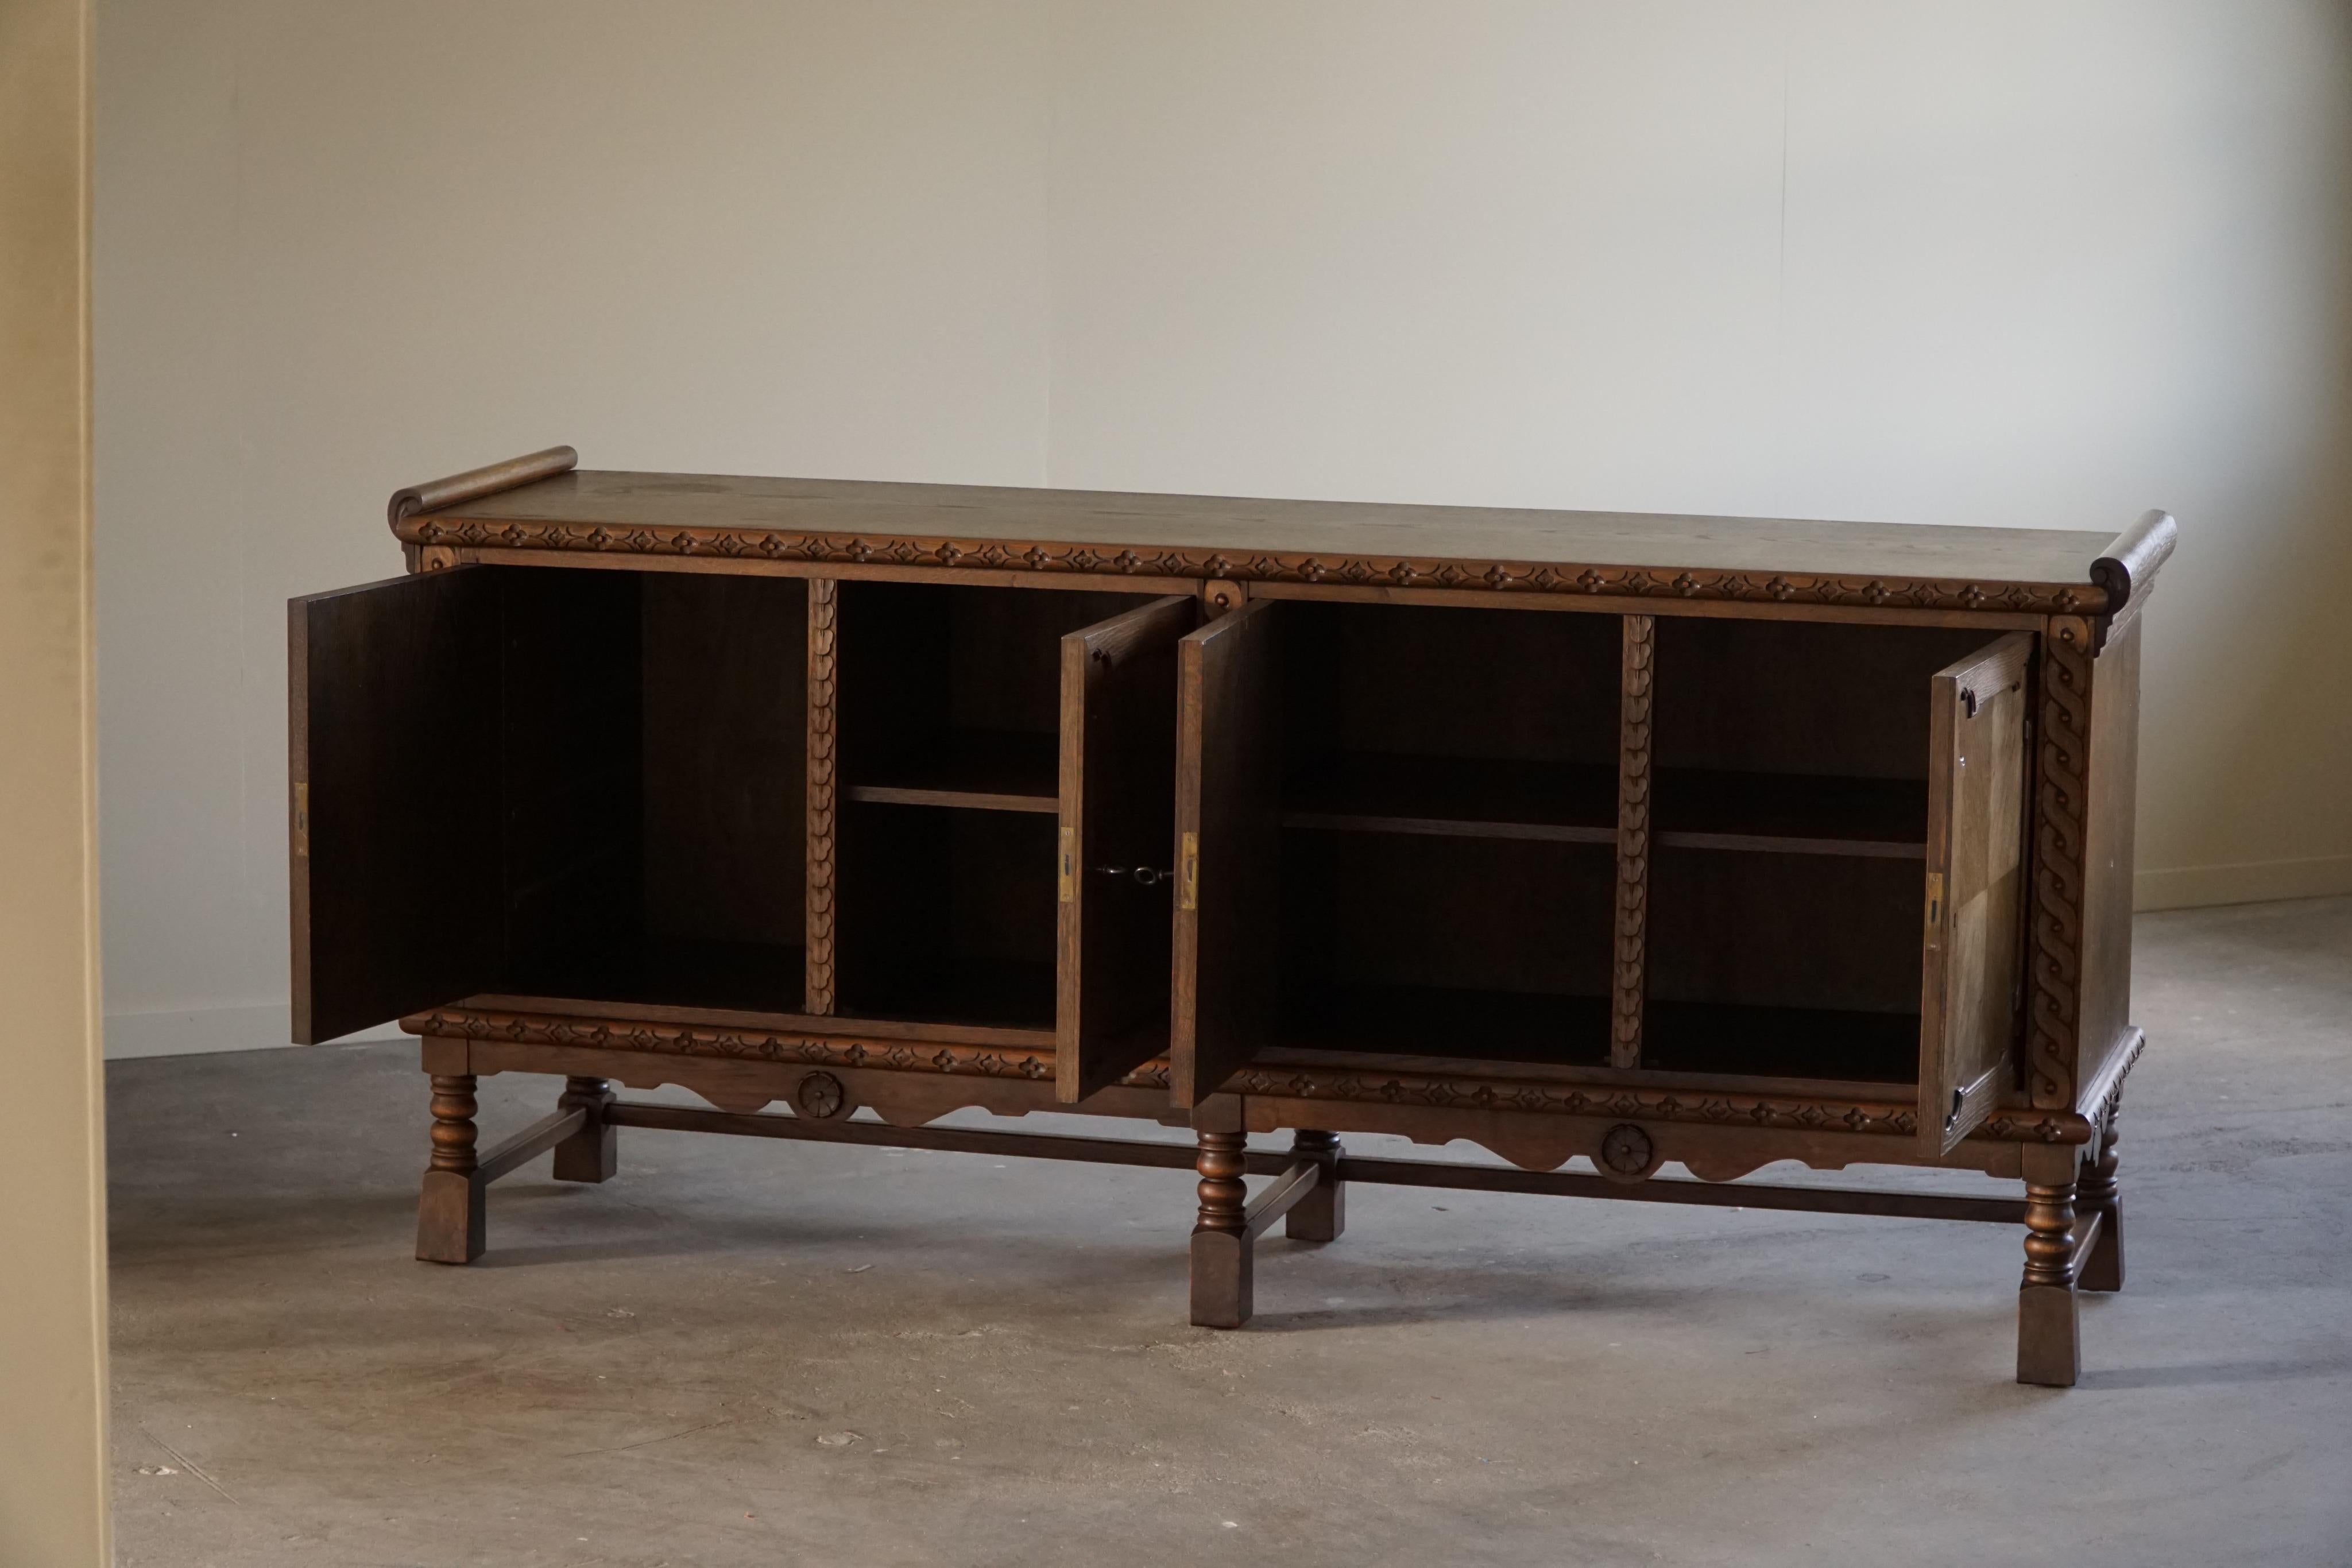 20th Century Sculptural Low Sideboard in Oak, Midcentury, by a Danish Cabinetmaker, 1950s